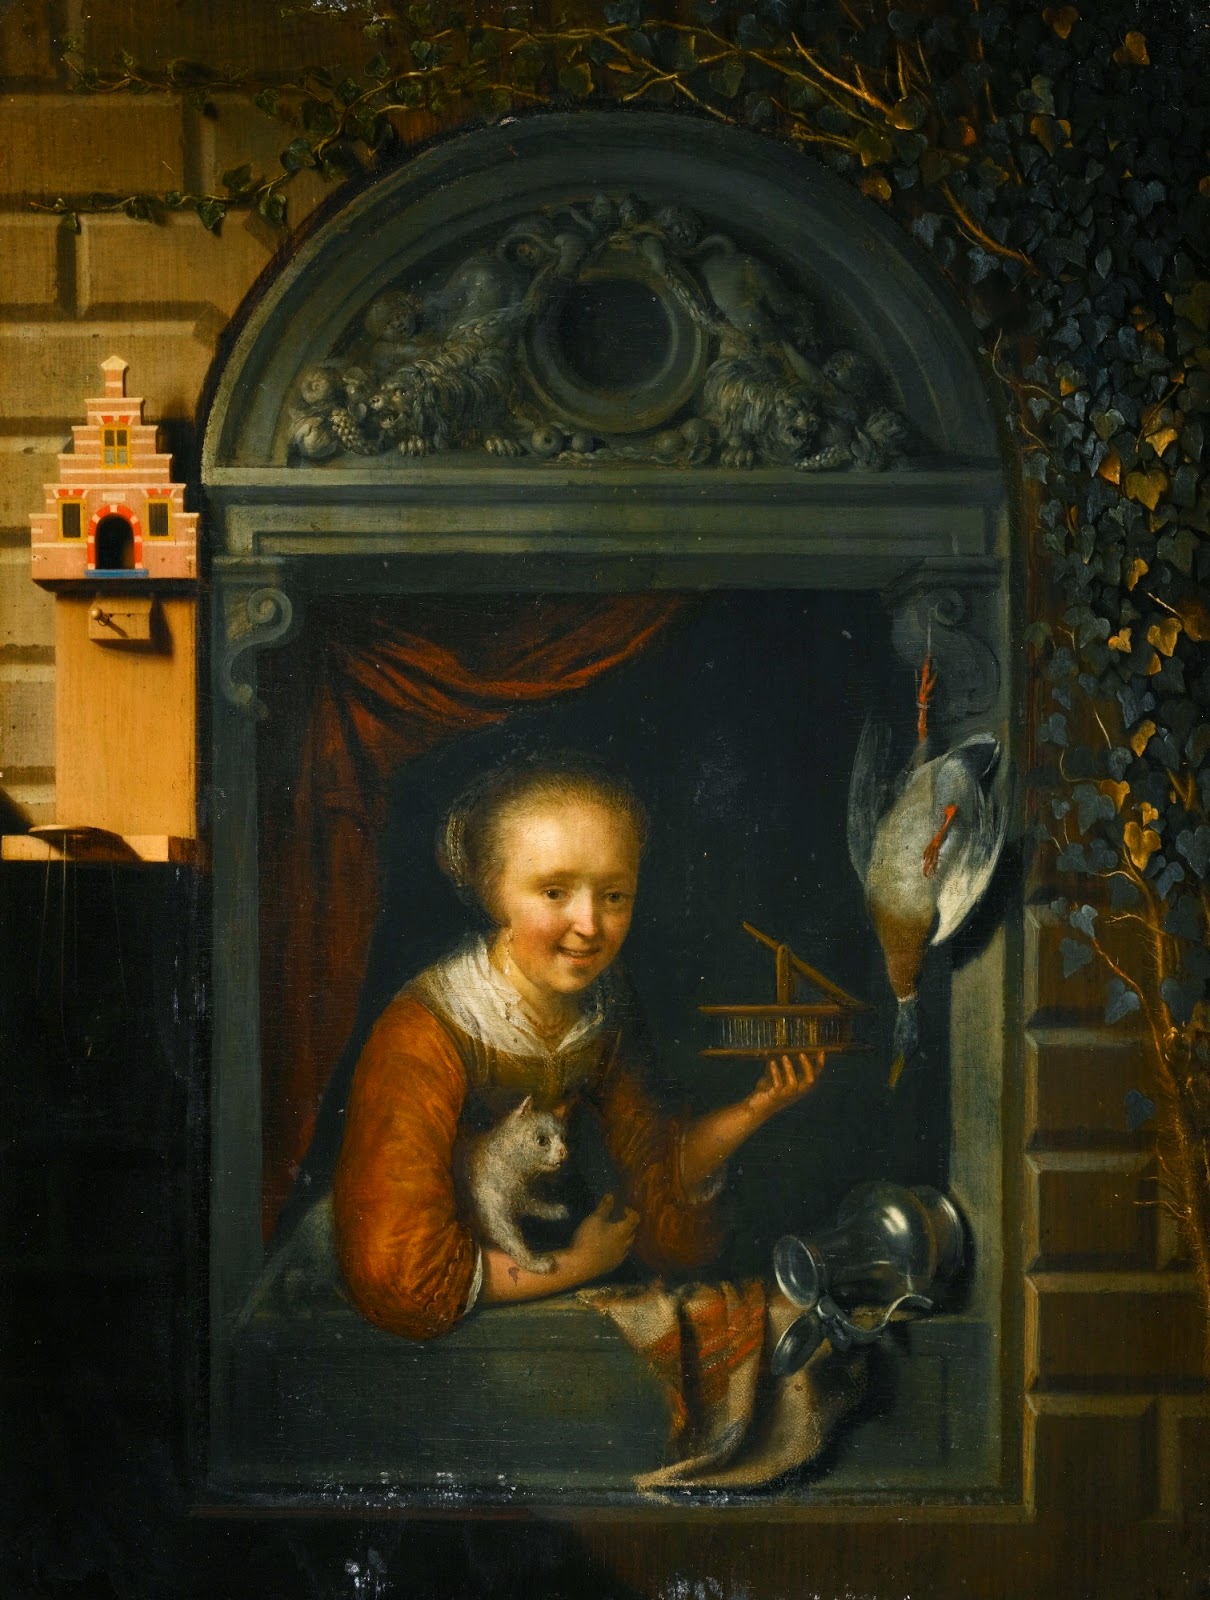 Gerrit Dou - A Young Girl at a Window Ledge with a Cat and Mouse-Trap